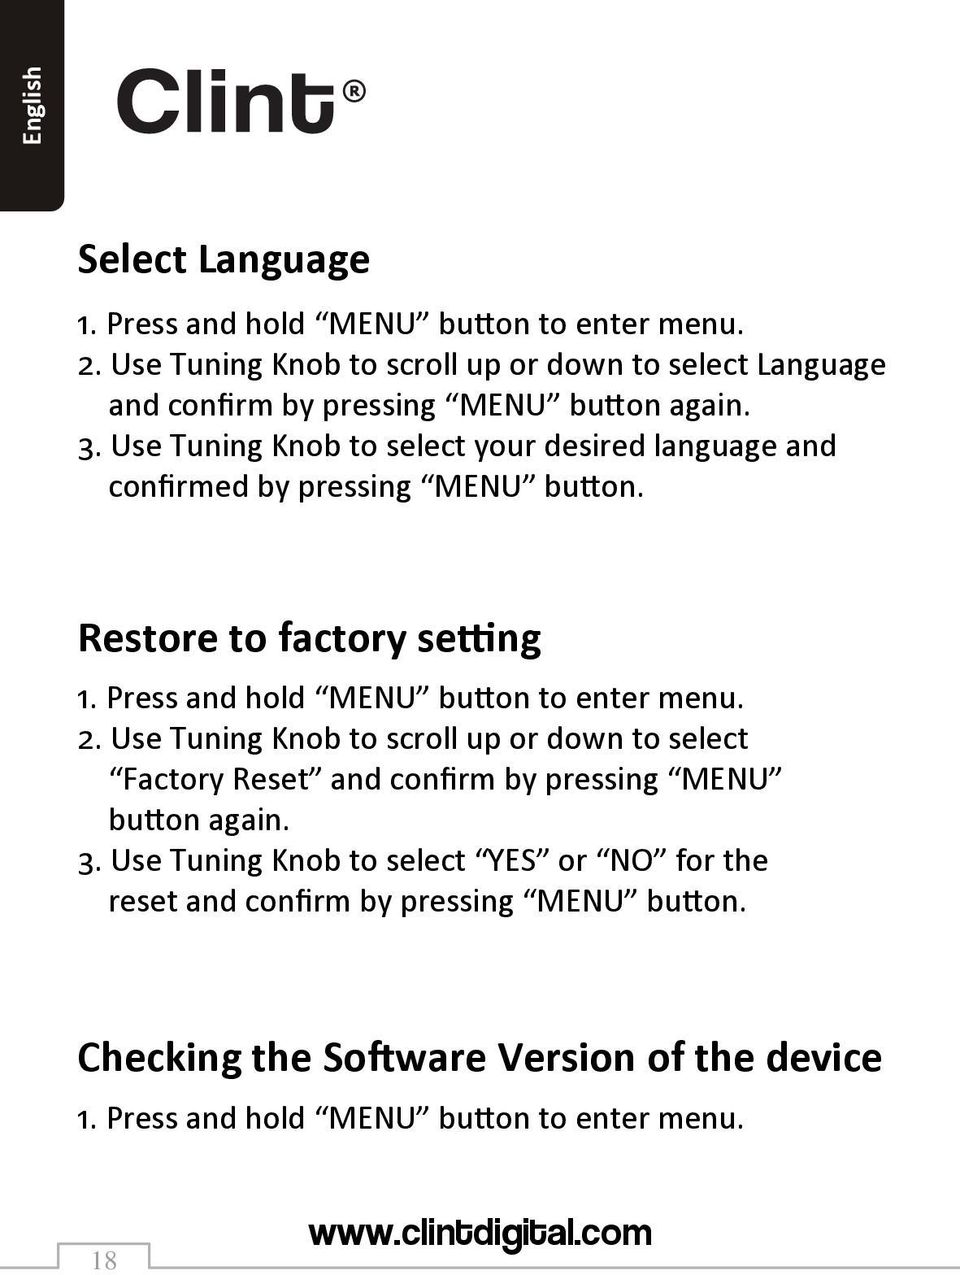 Use Tuning Knob to select your desired language and confirmed by pressing MENU button. Restore to factory setting 1.